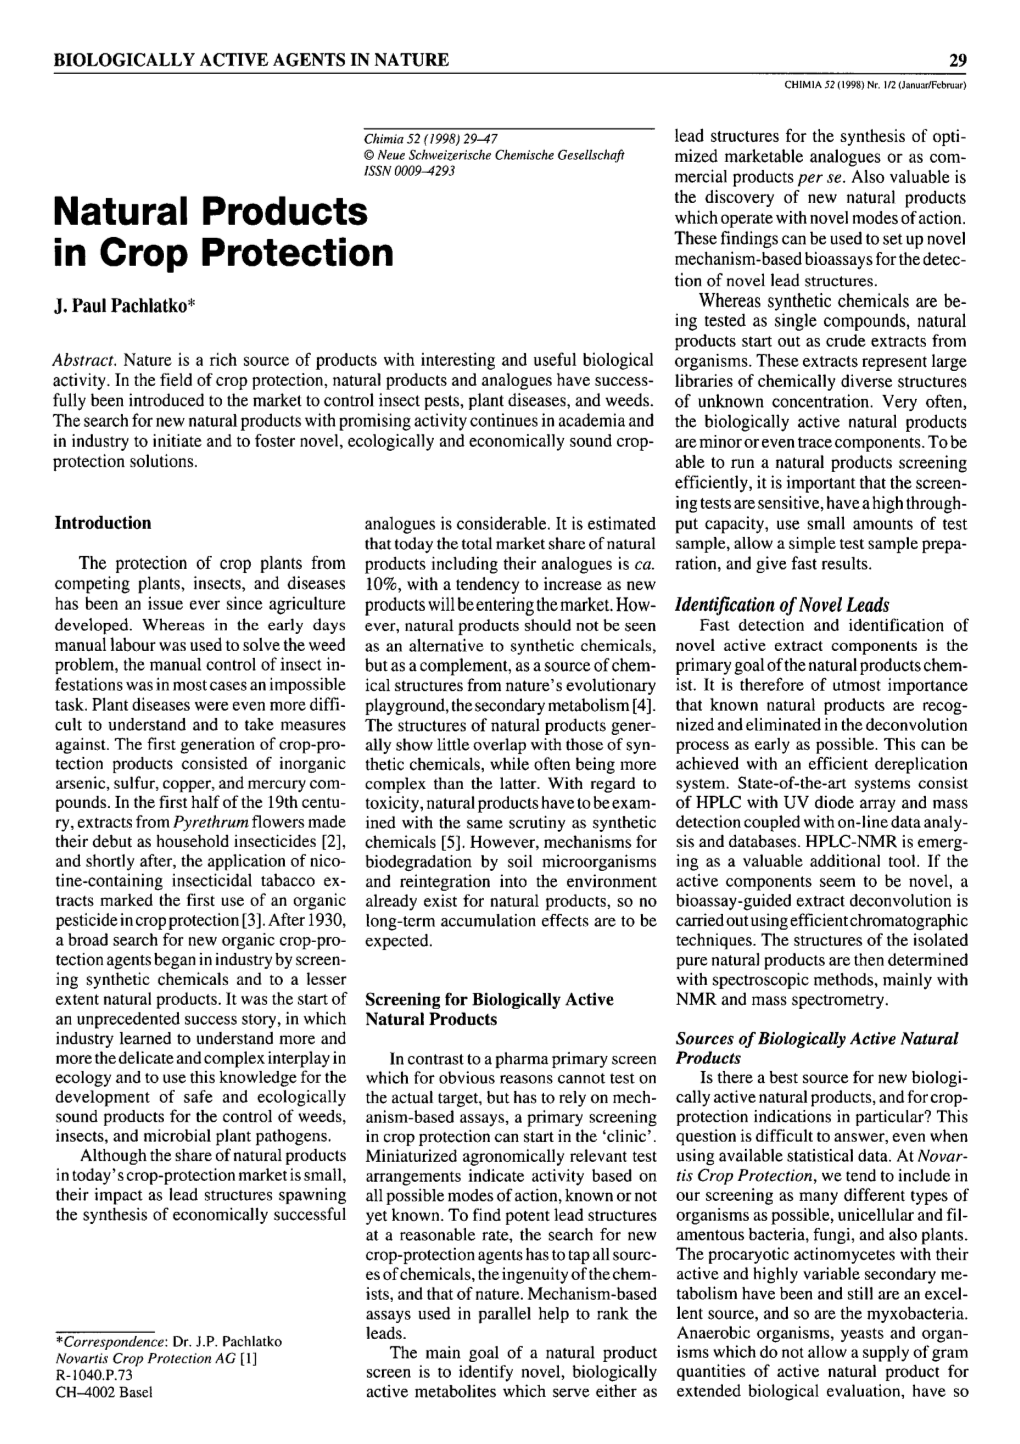 Natural Products in Crop Protection